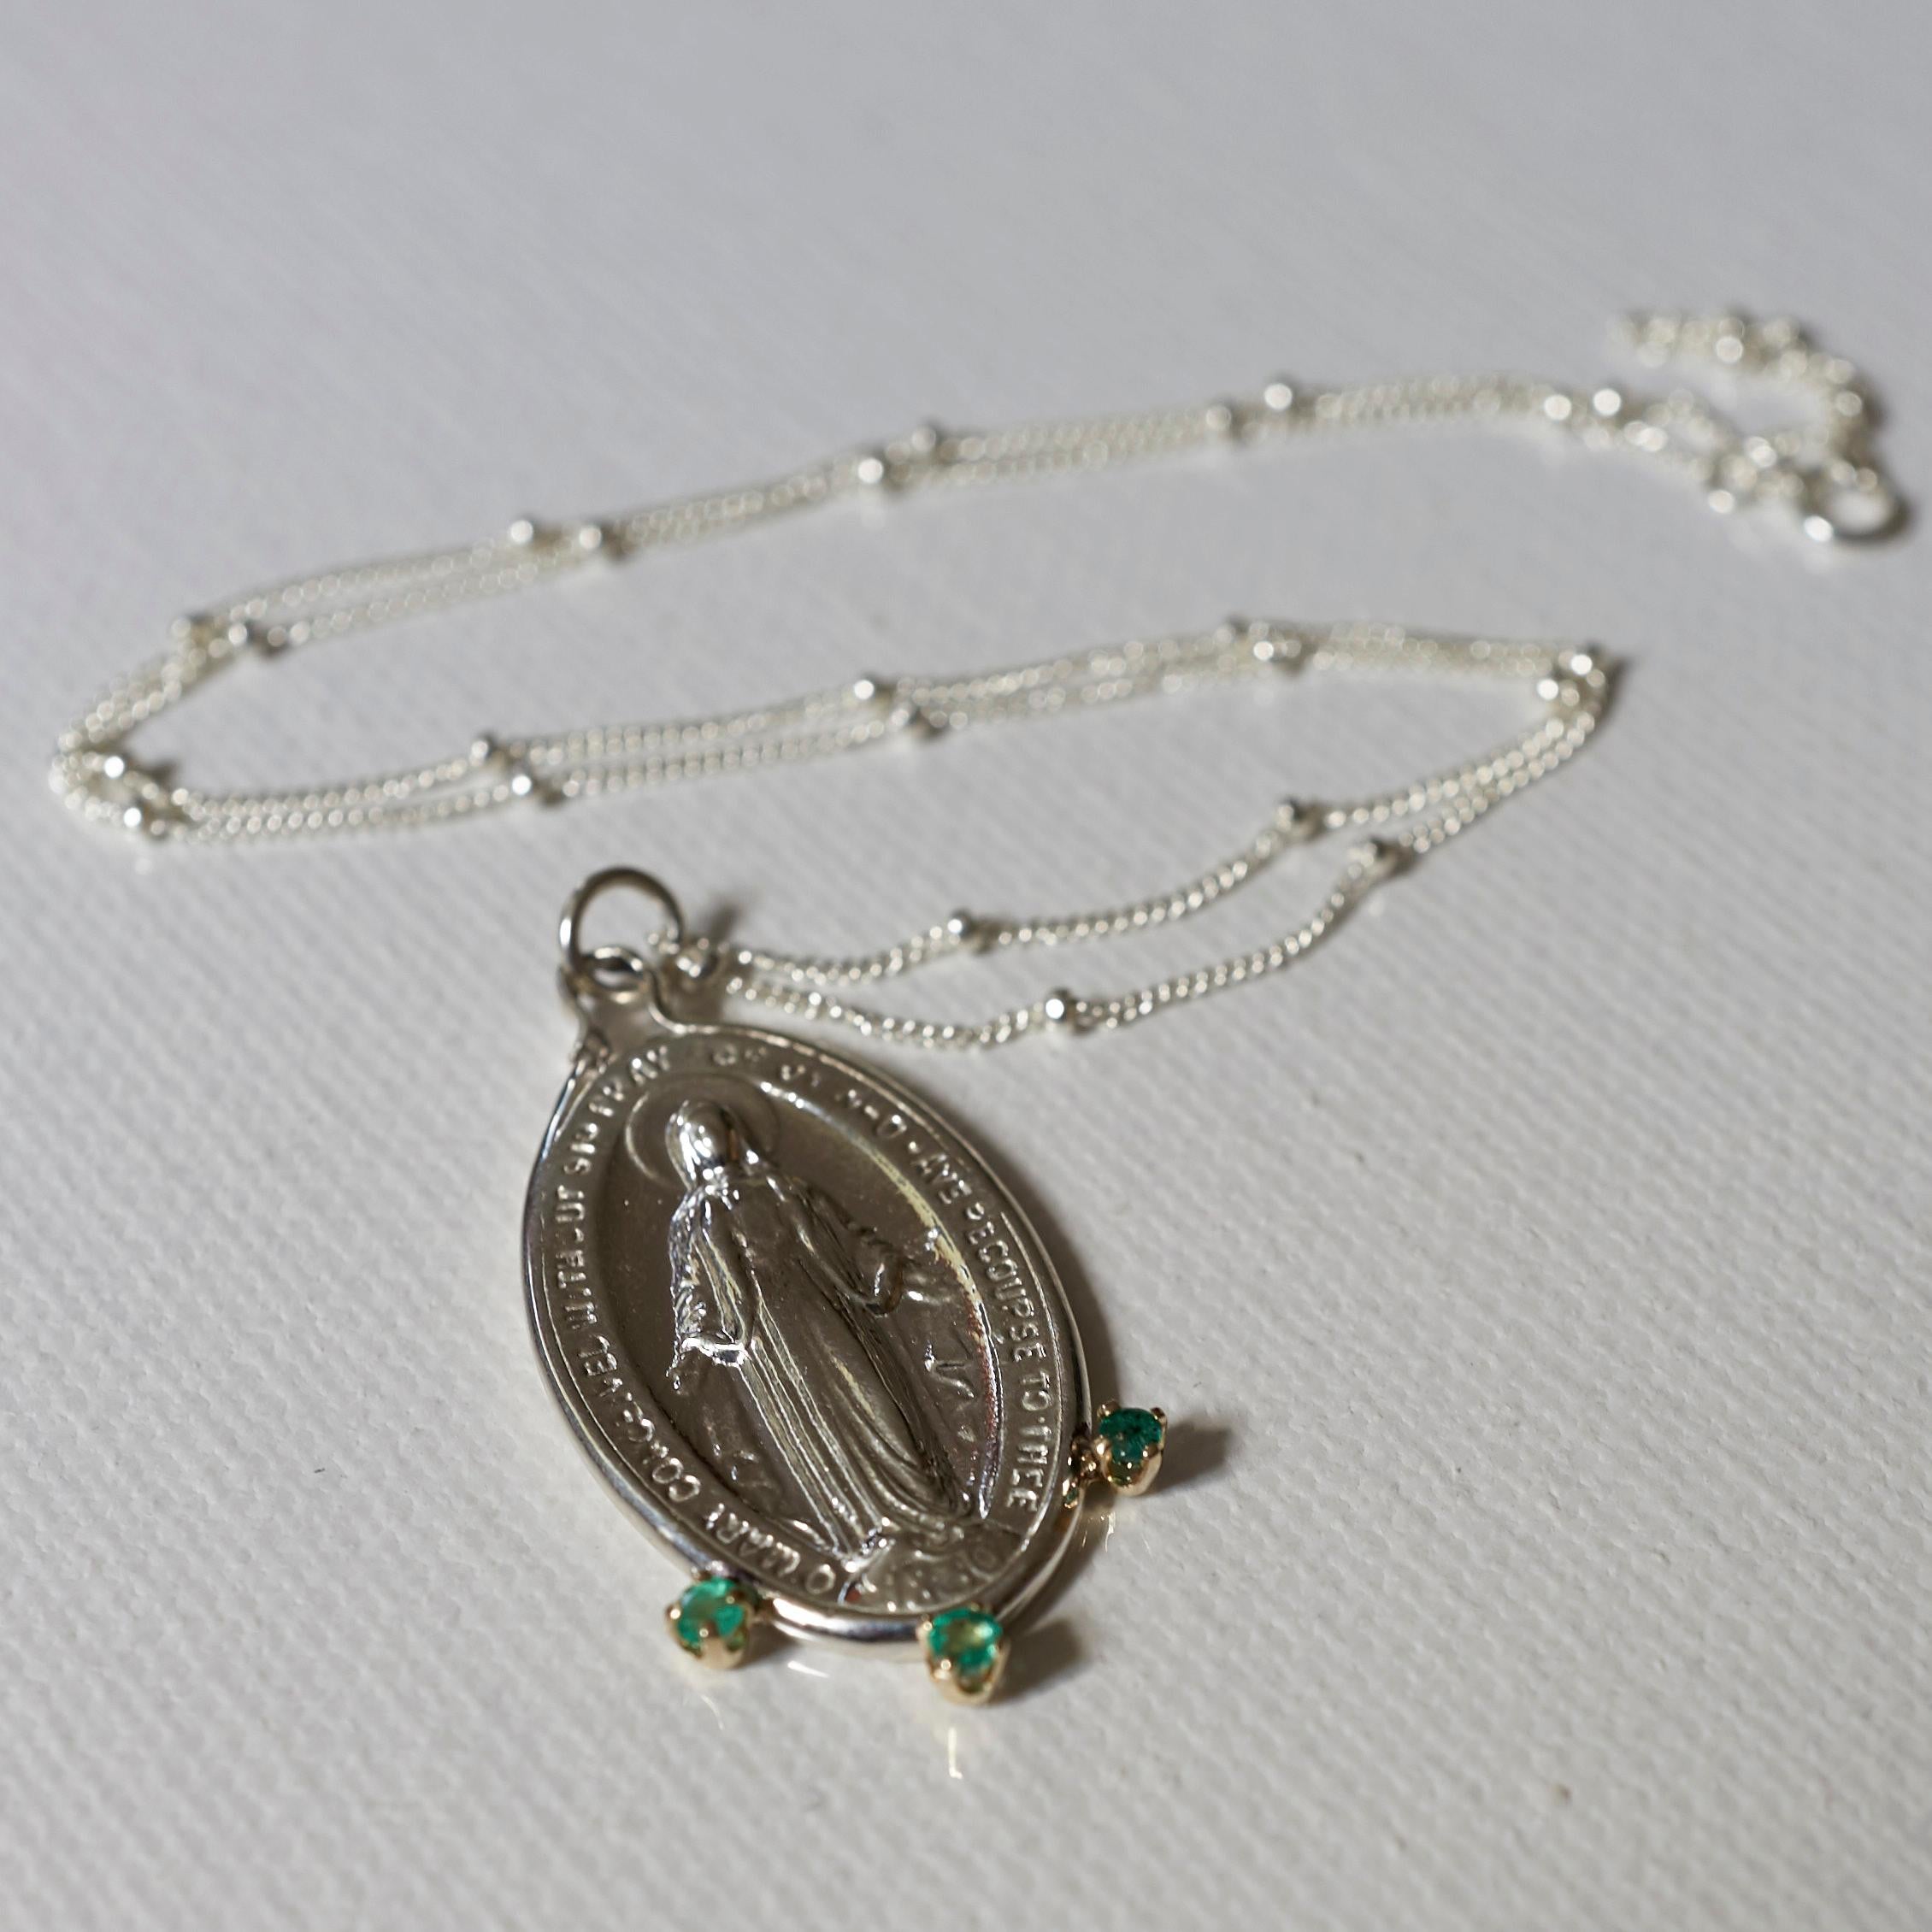 Emerald Virgin French Miraculous Medal Oval Coin Pendant Chain Necklace Silver In New Condition For Sale In Los Angeles, CA